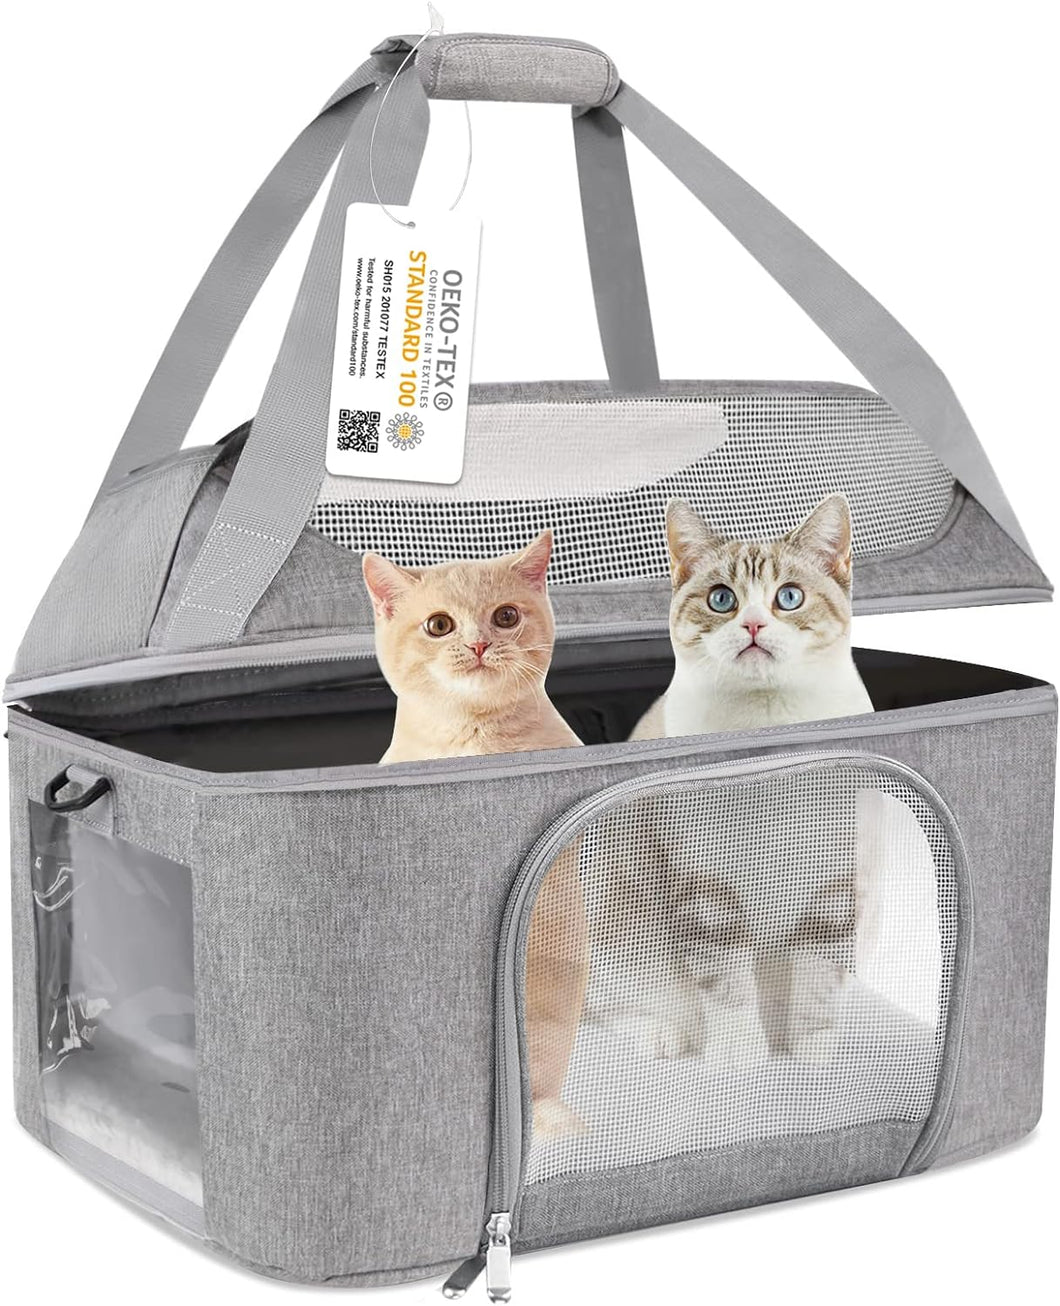 Oeko-TEX Certified Soft Side Pet Carrier for Cat, Small Dog, Collapsible Travel Small Carrier, TSA Airline Approved